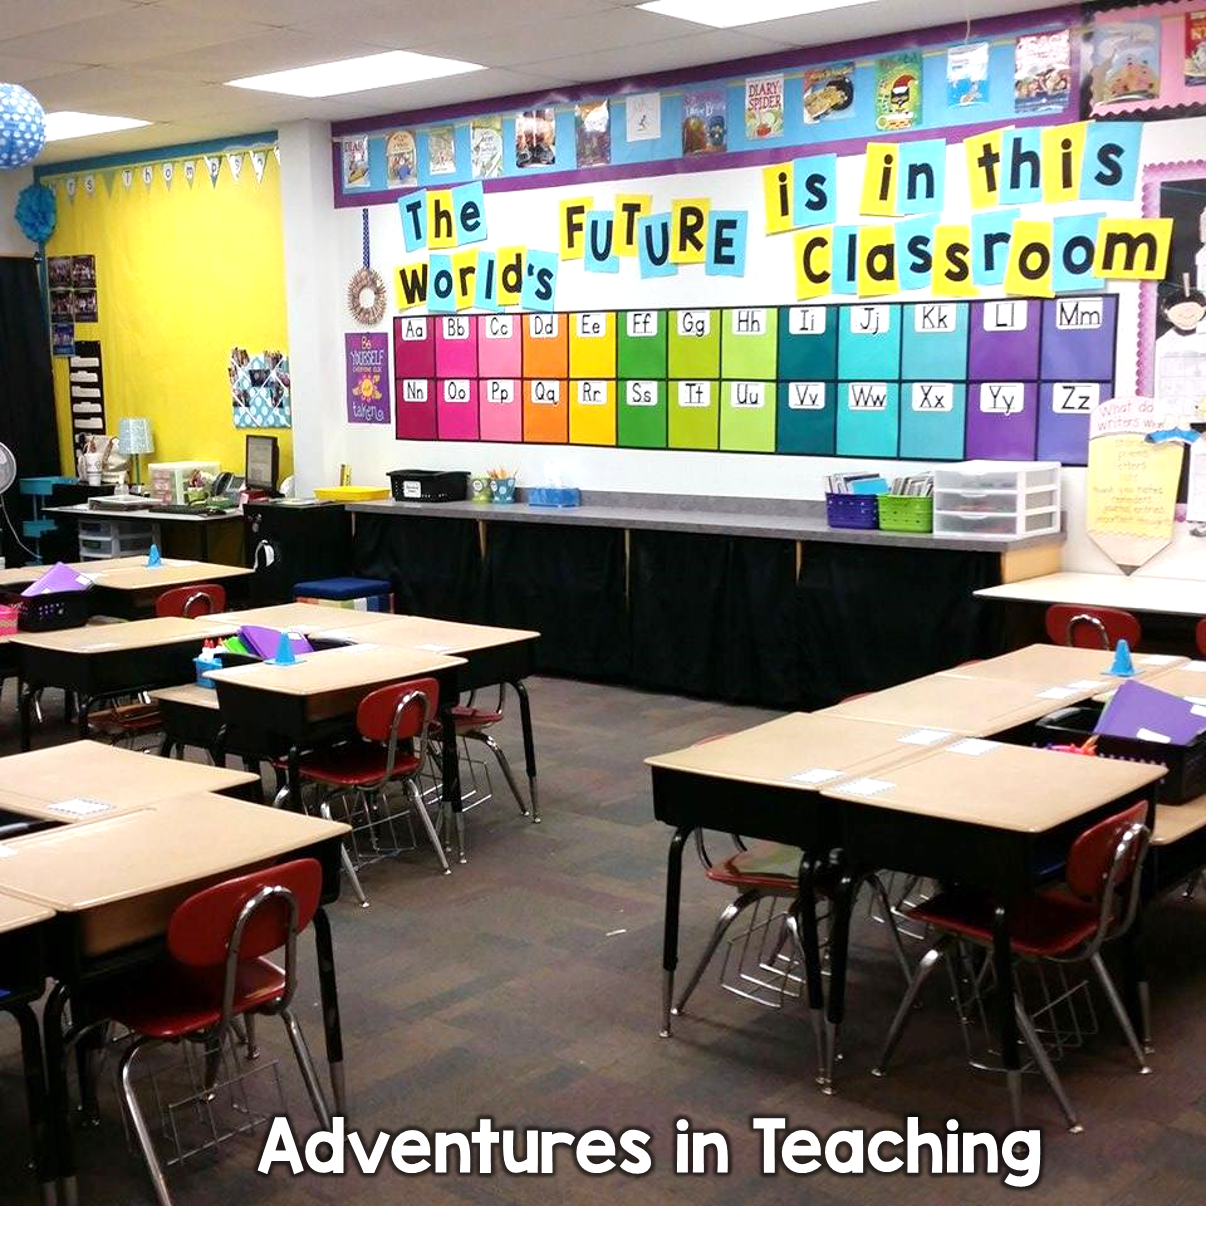 Bright and colorful 1st grade classroom with desks in groups and a quote on the wall that says "The world's future is in this classroom".